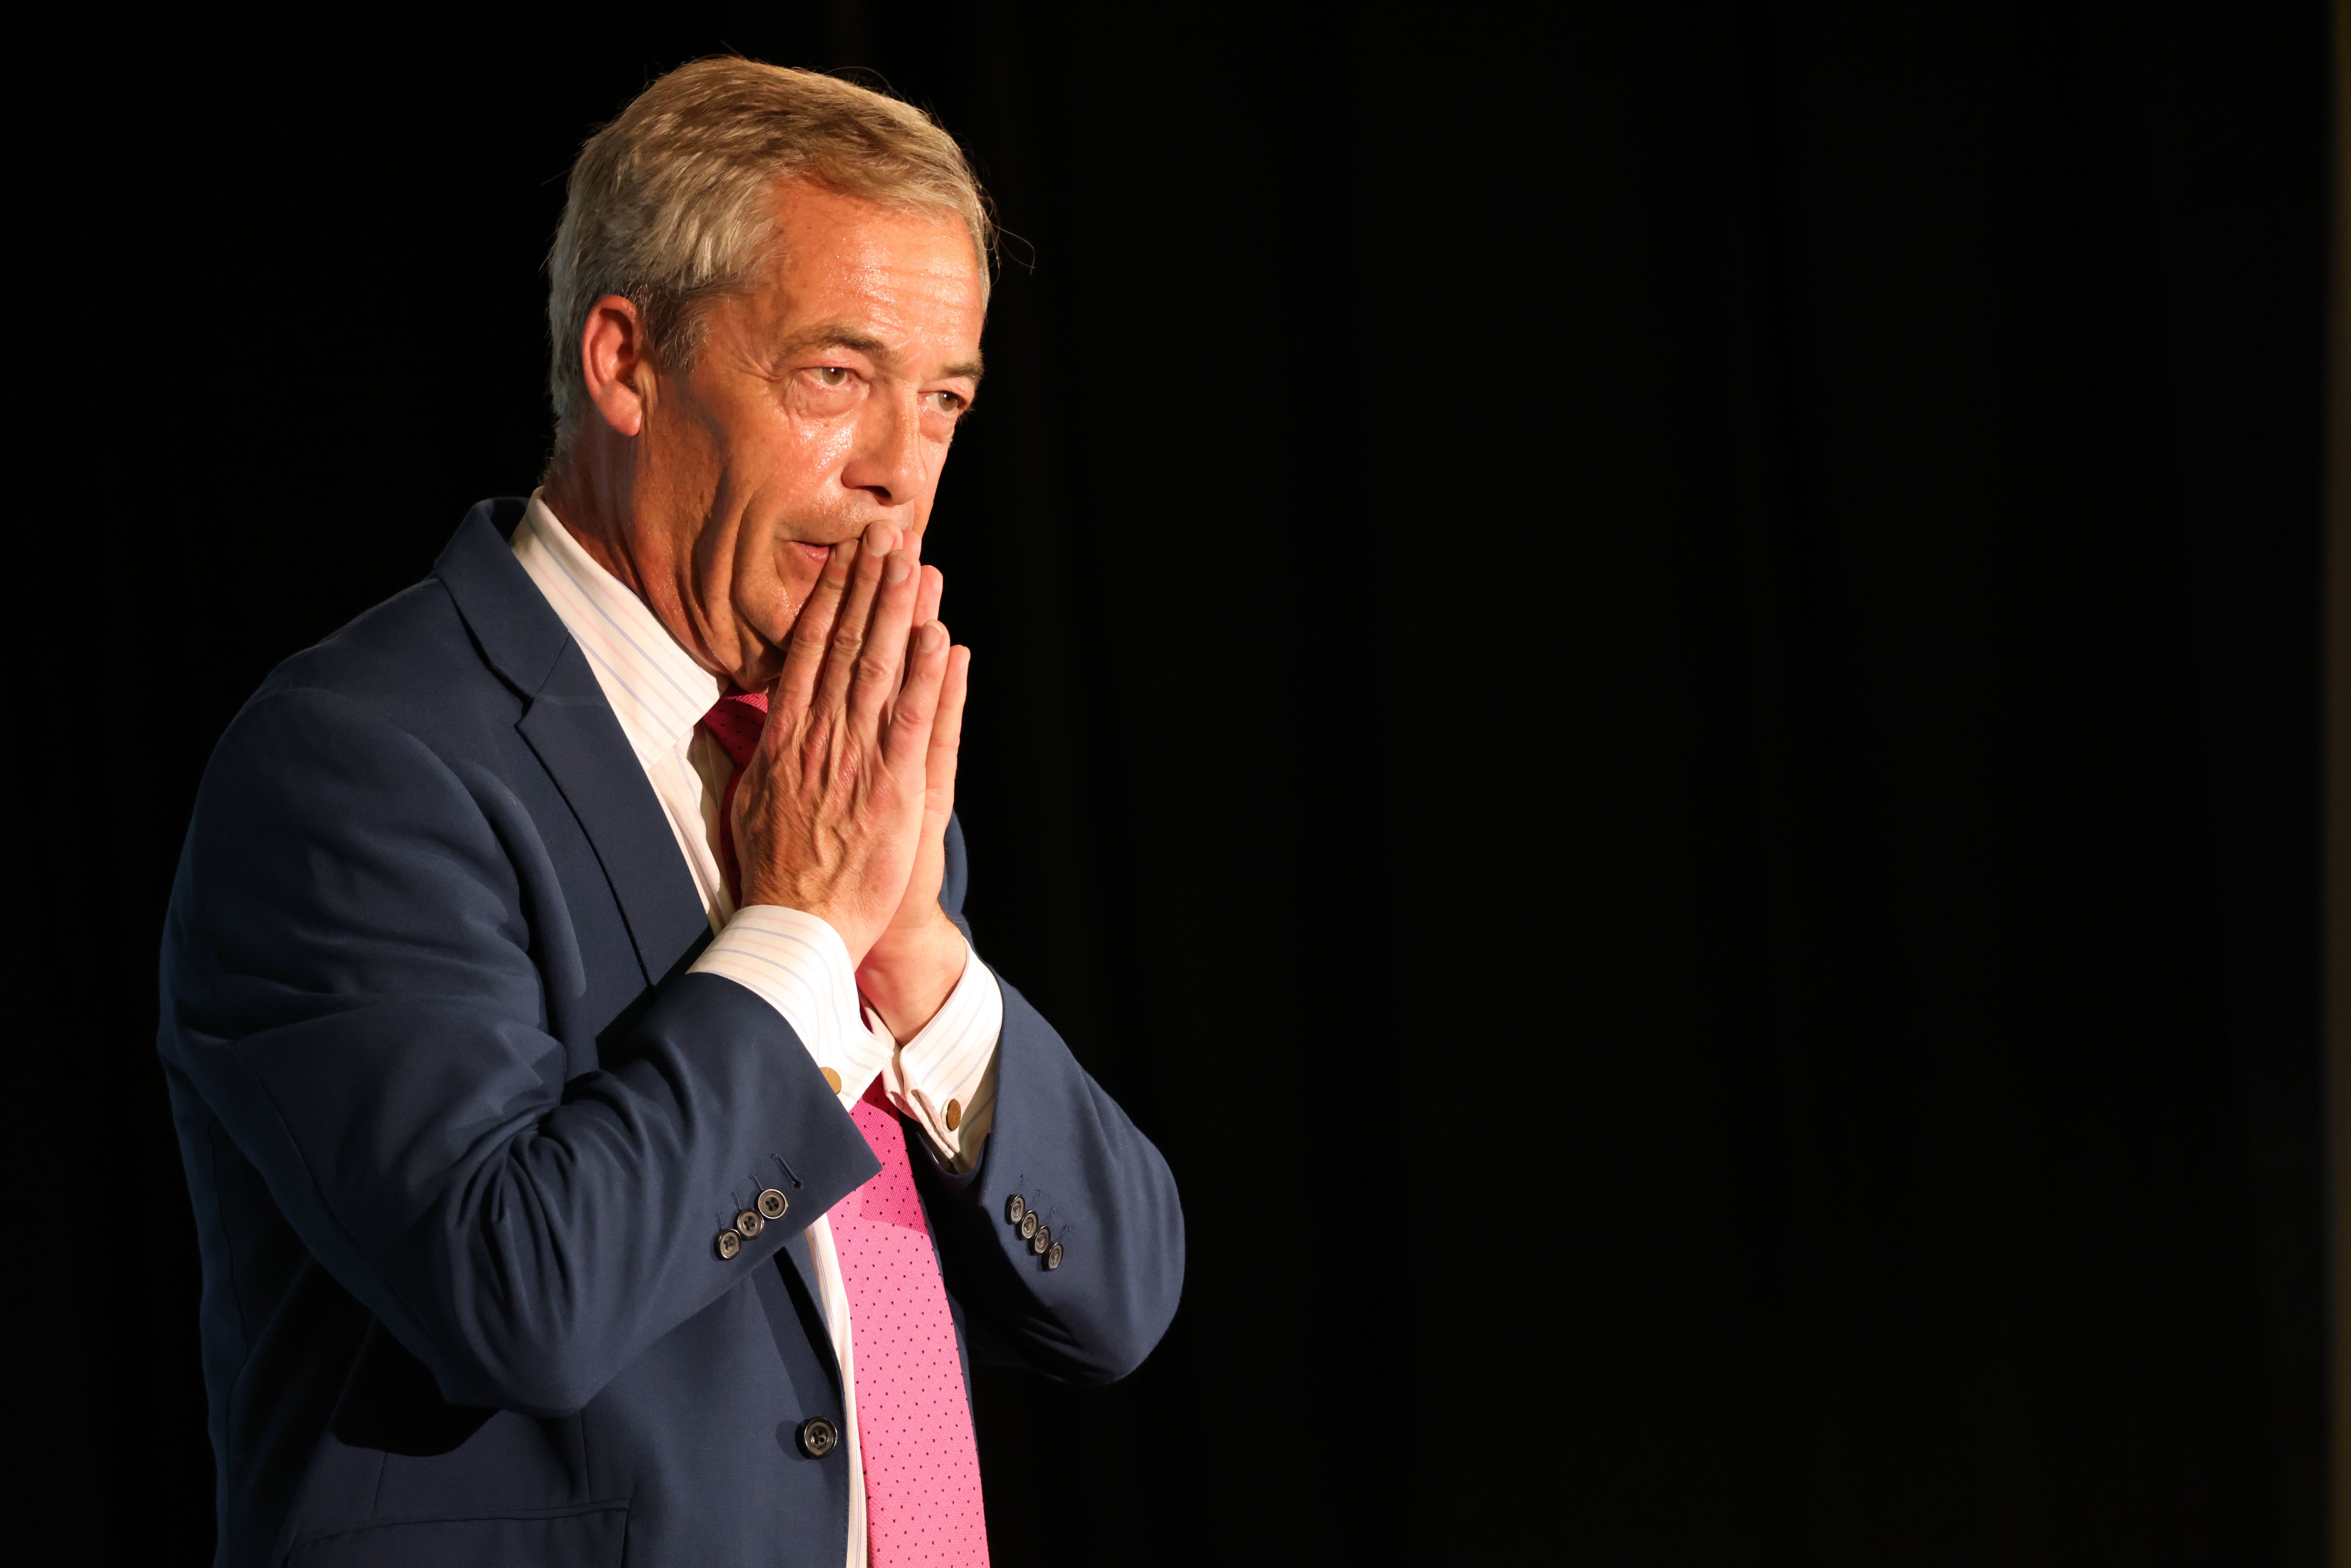 Reform UK leader Nigel Farage has sought to distance himself from his campaigners’ comments (Paul Marriott/PA)